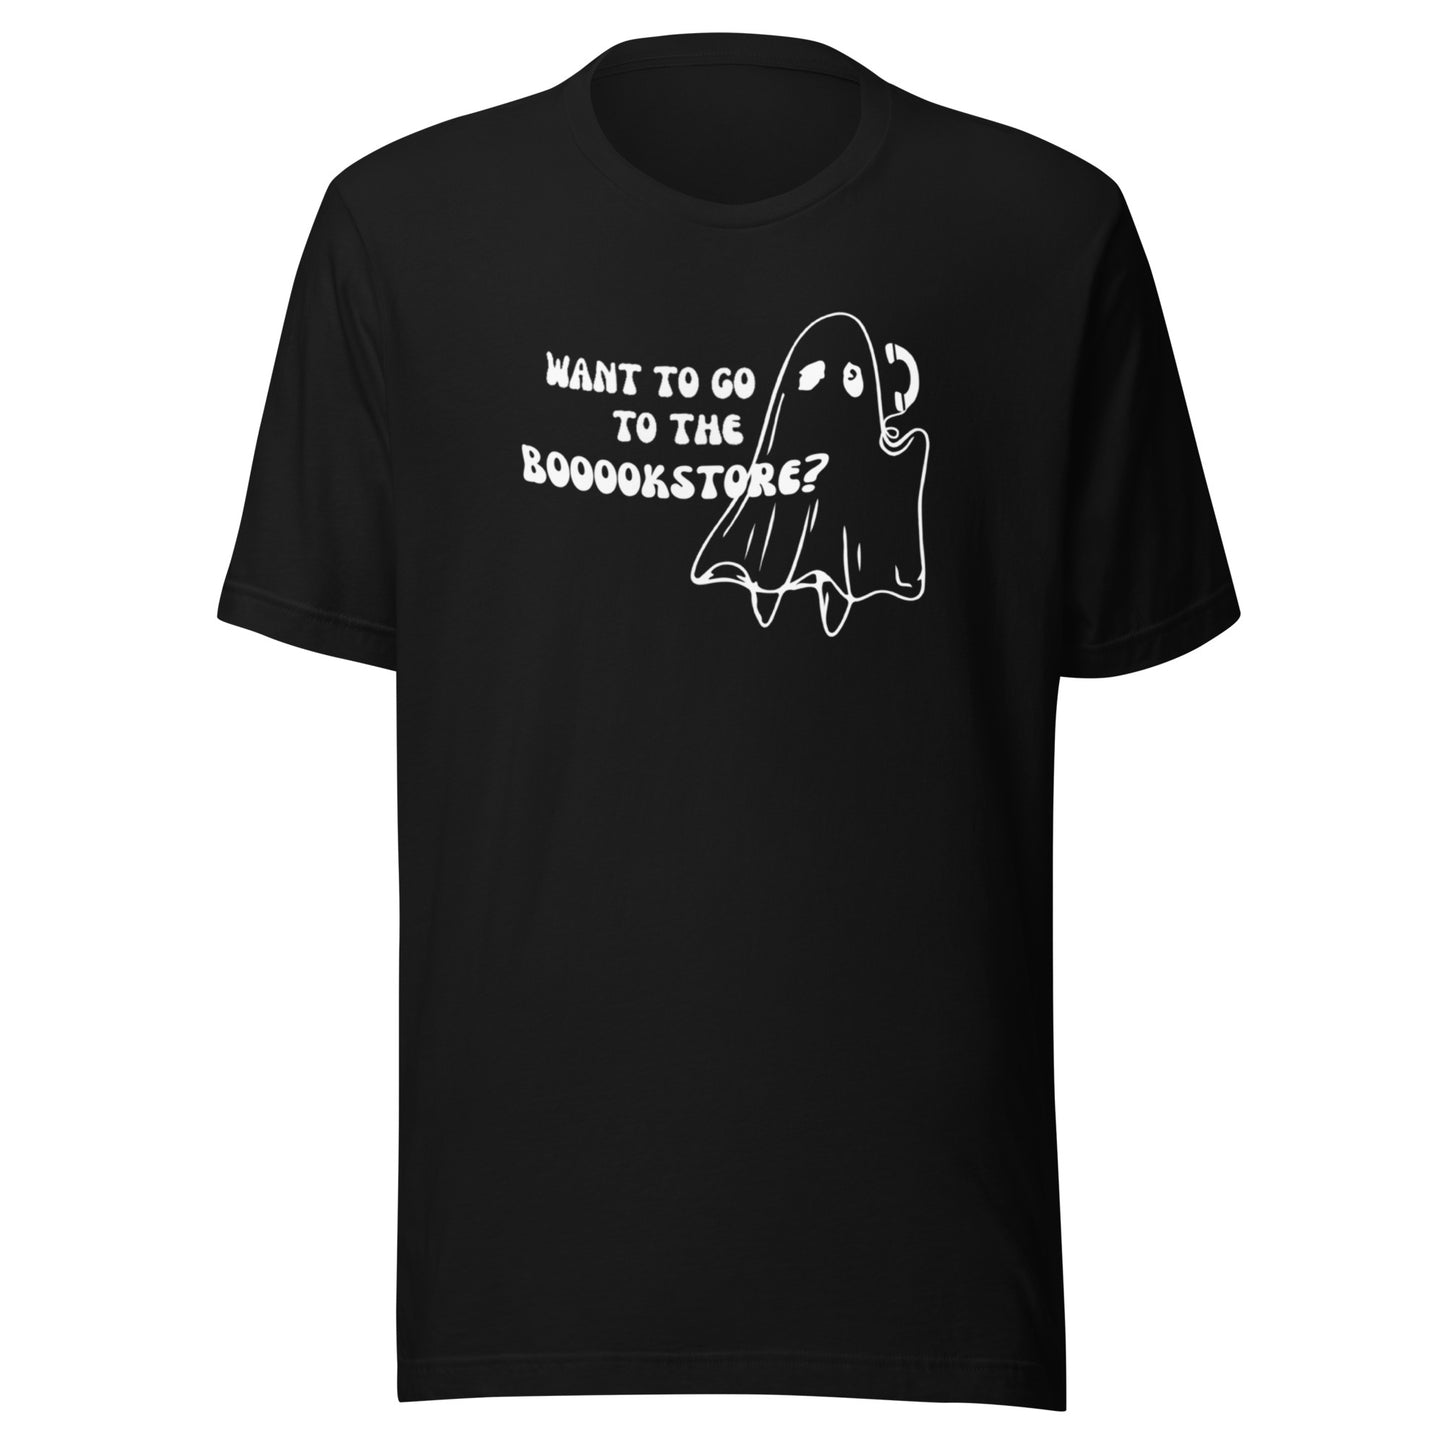 want to go to the boookstore? t-shirt